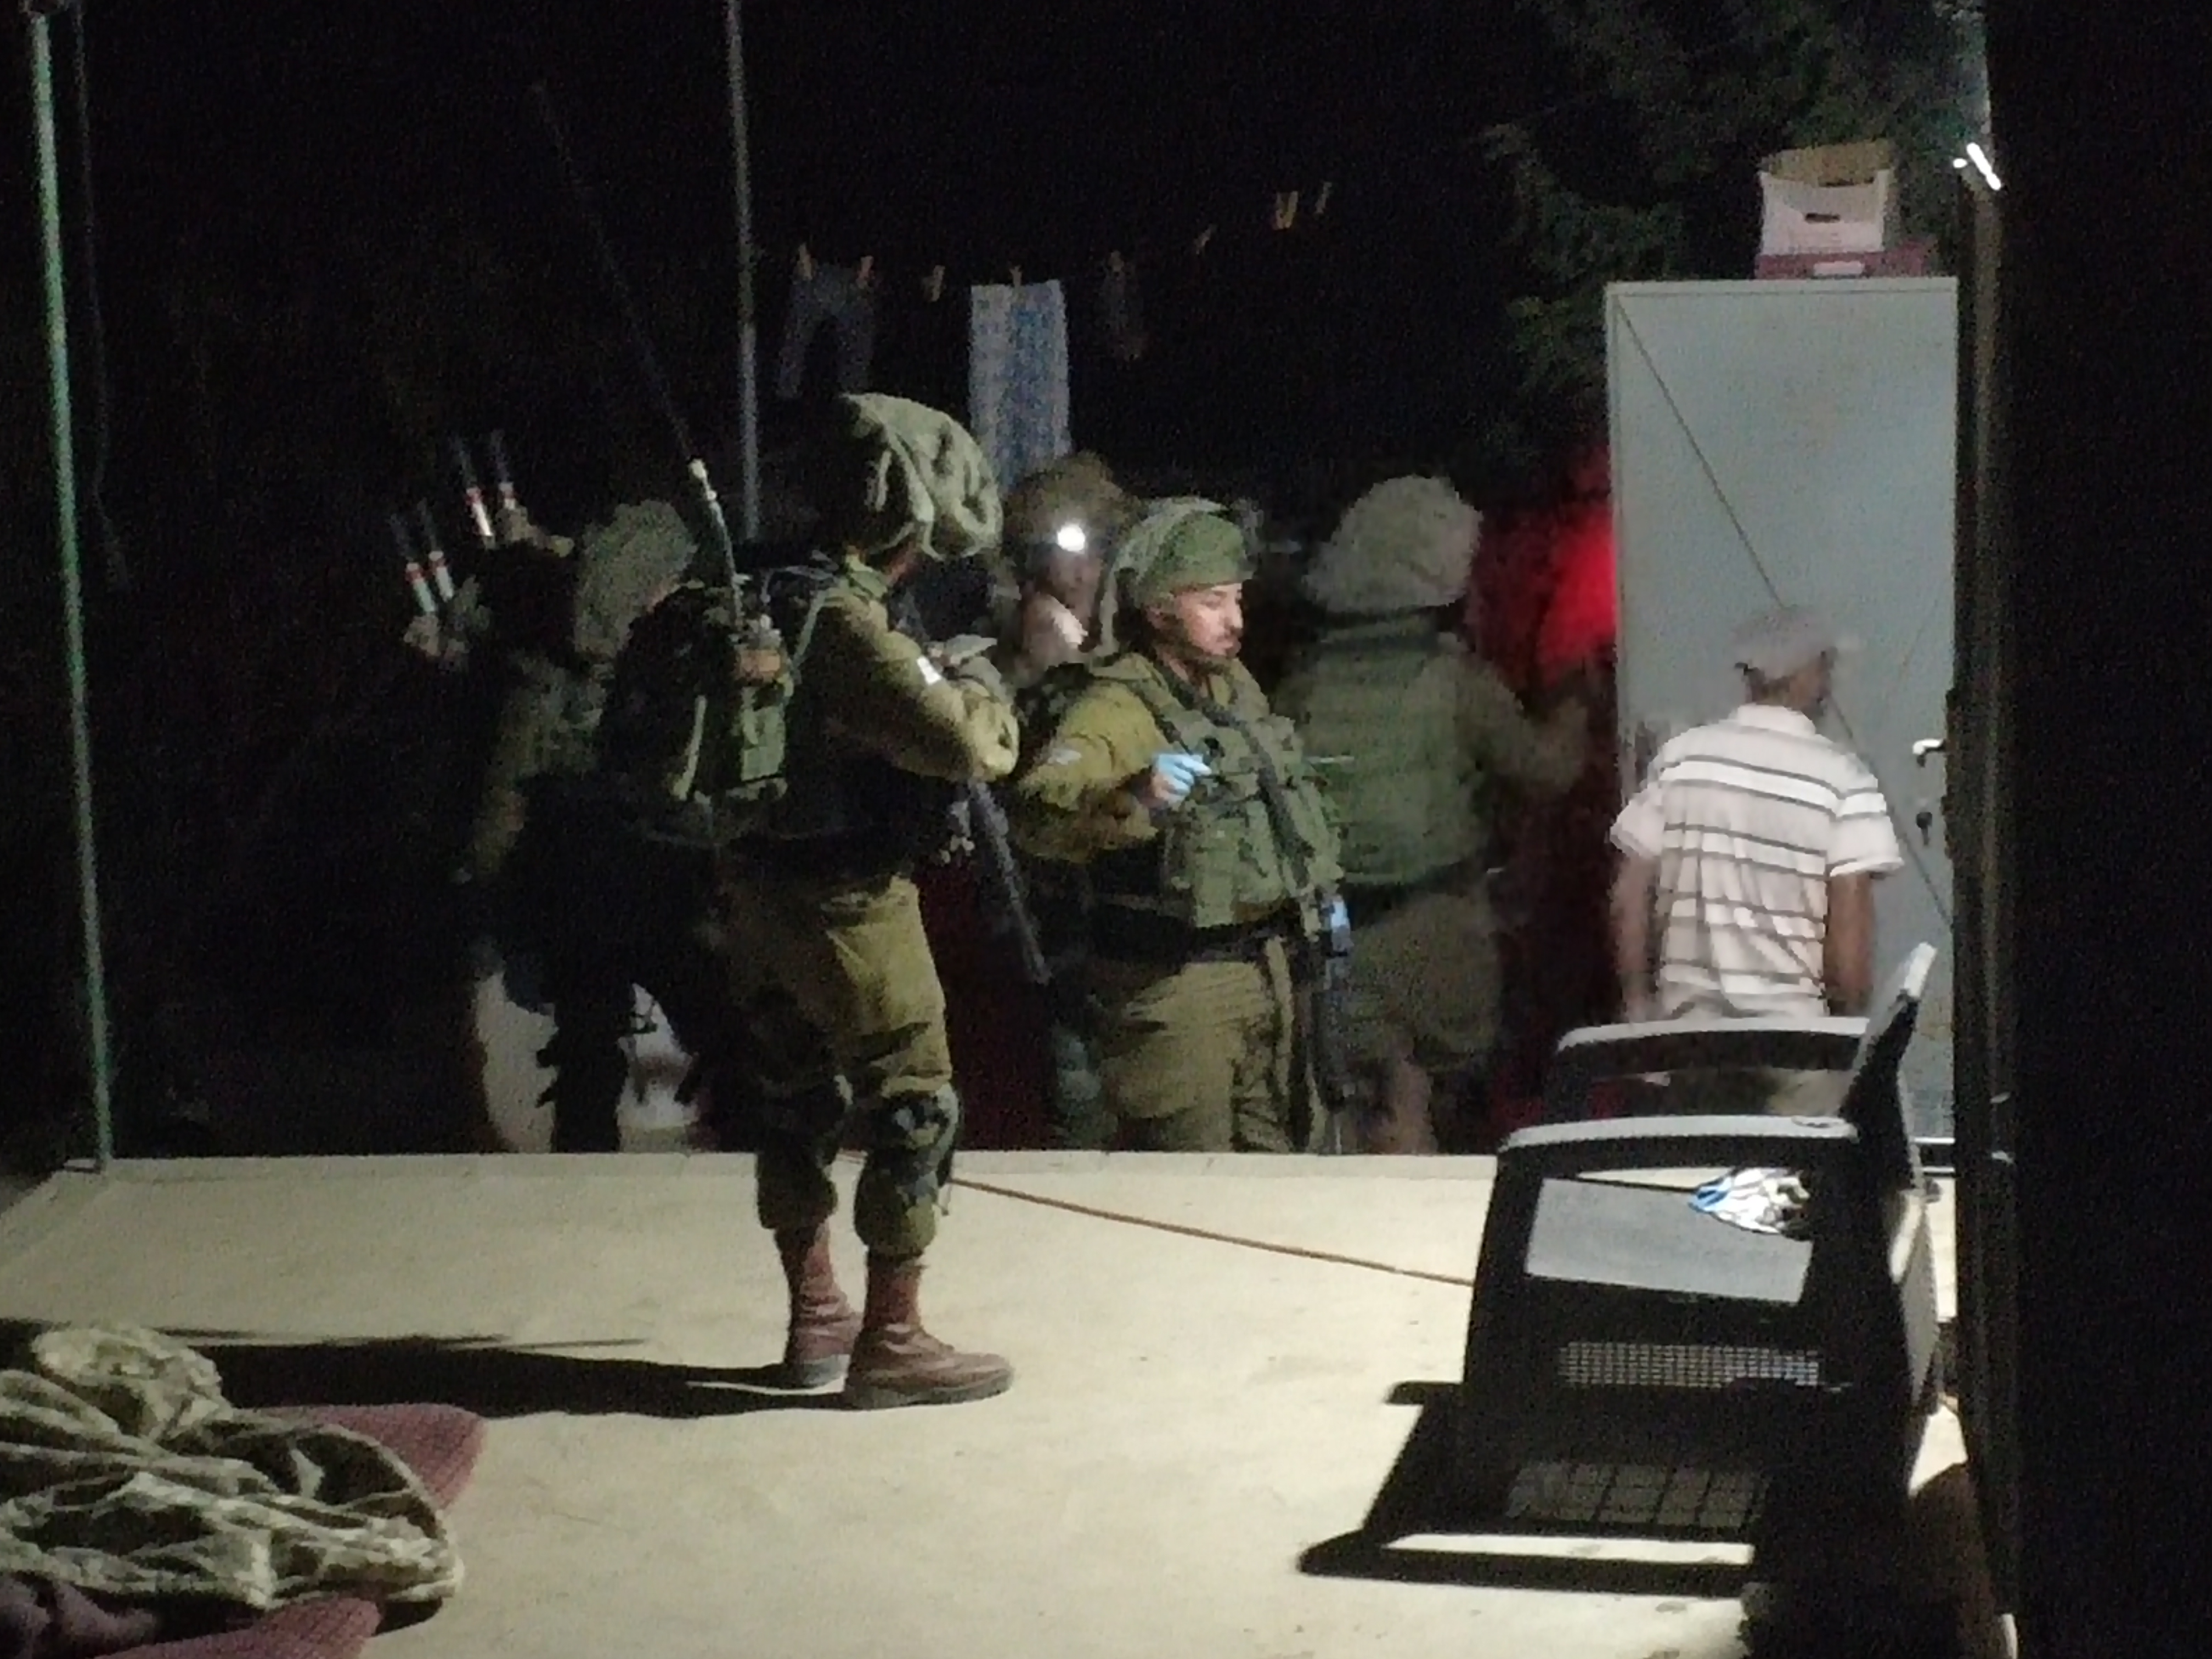 Israeli soldiers raided 8 villages from midnight to early morning, awaking residents and searching houses without giving a reason or warrant.